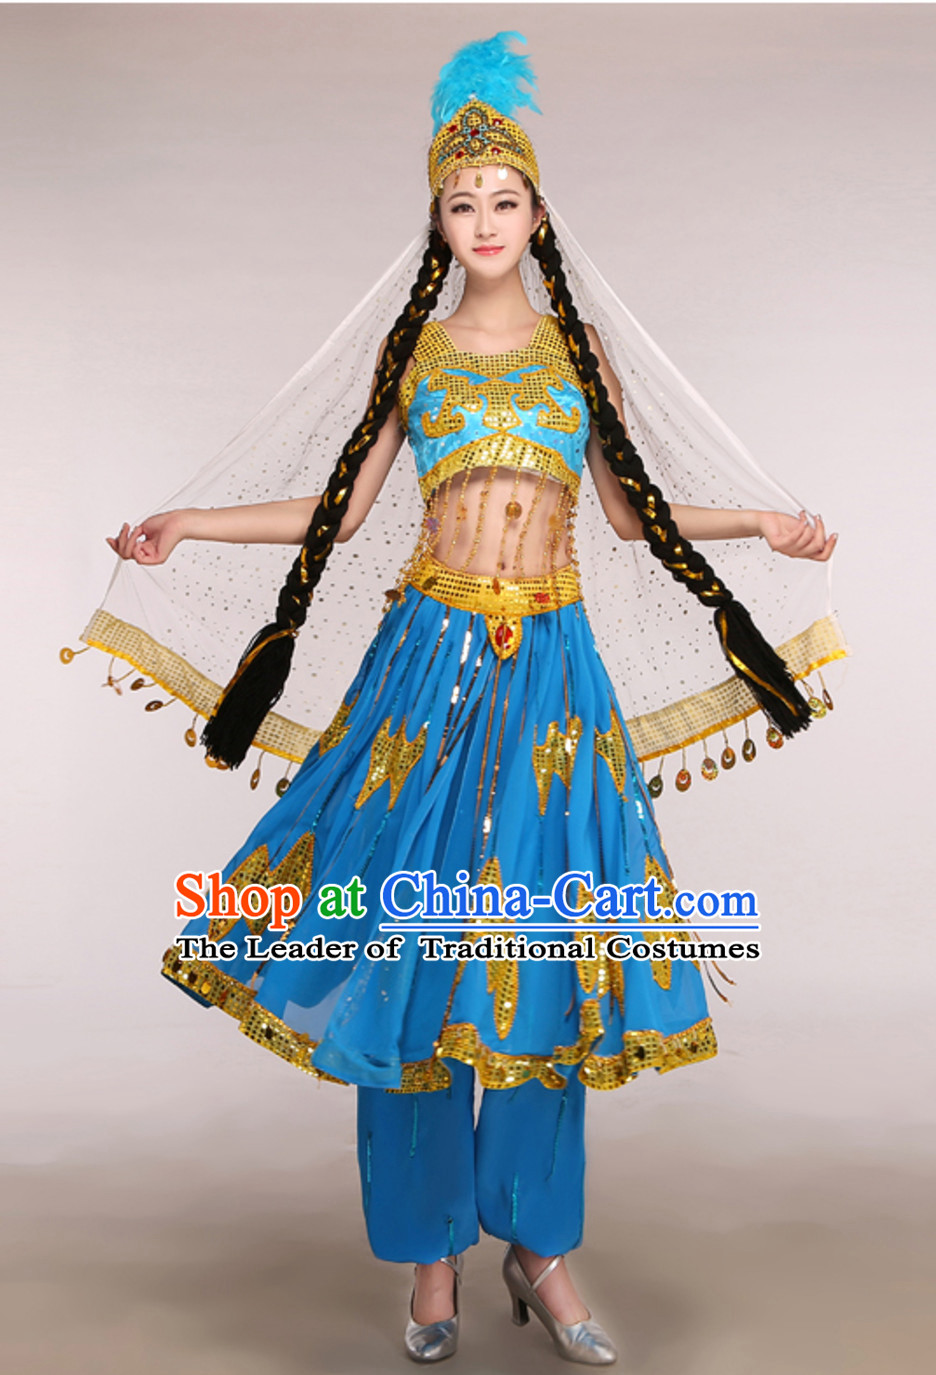 Blue Traditional Xinjiang Folk Dance Costumes for Adults Chinese Minority Ethnic Dance Outfits